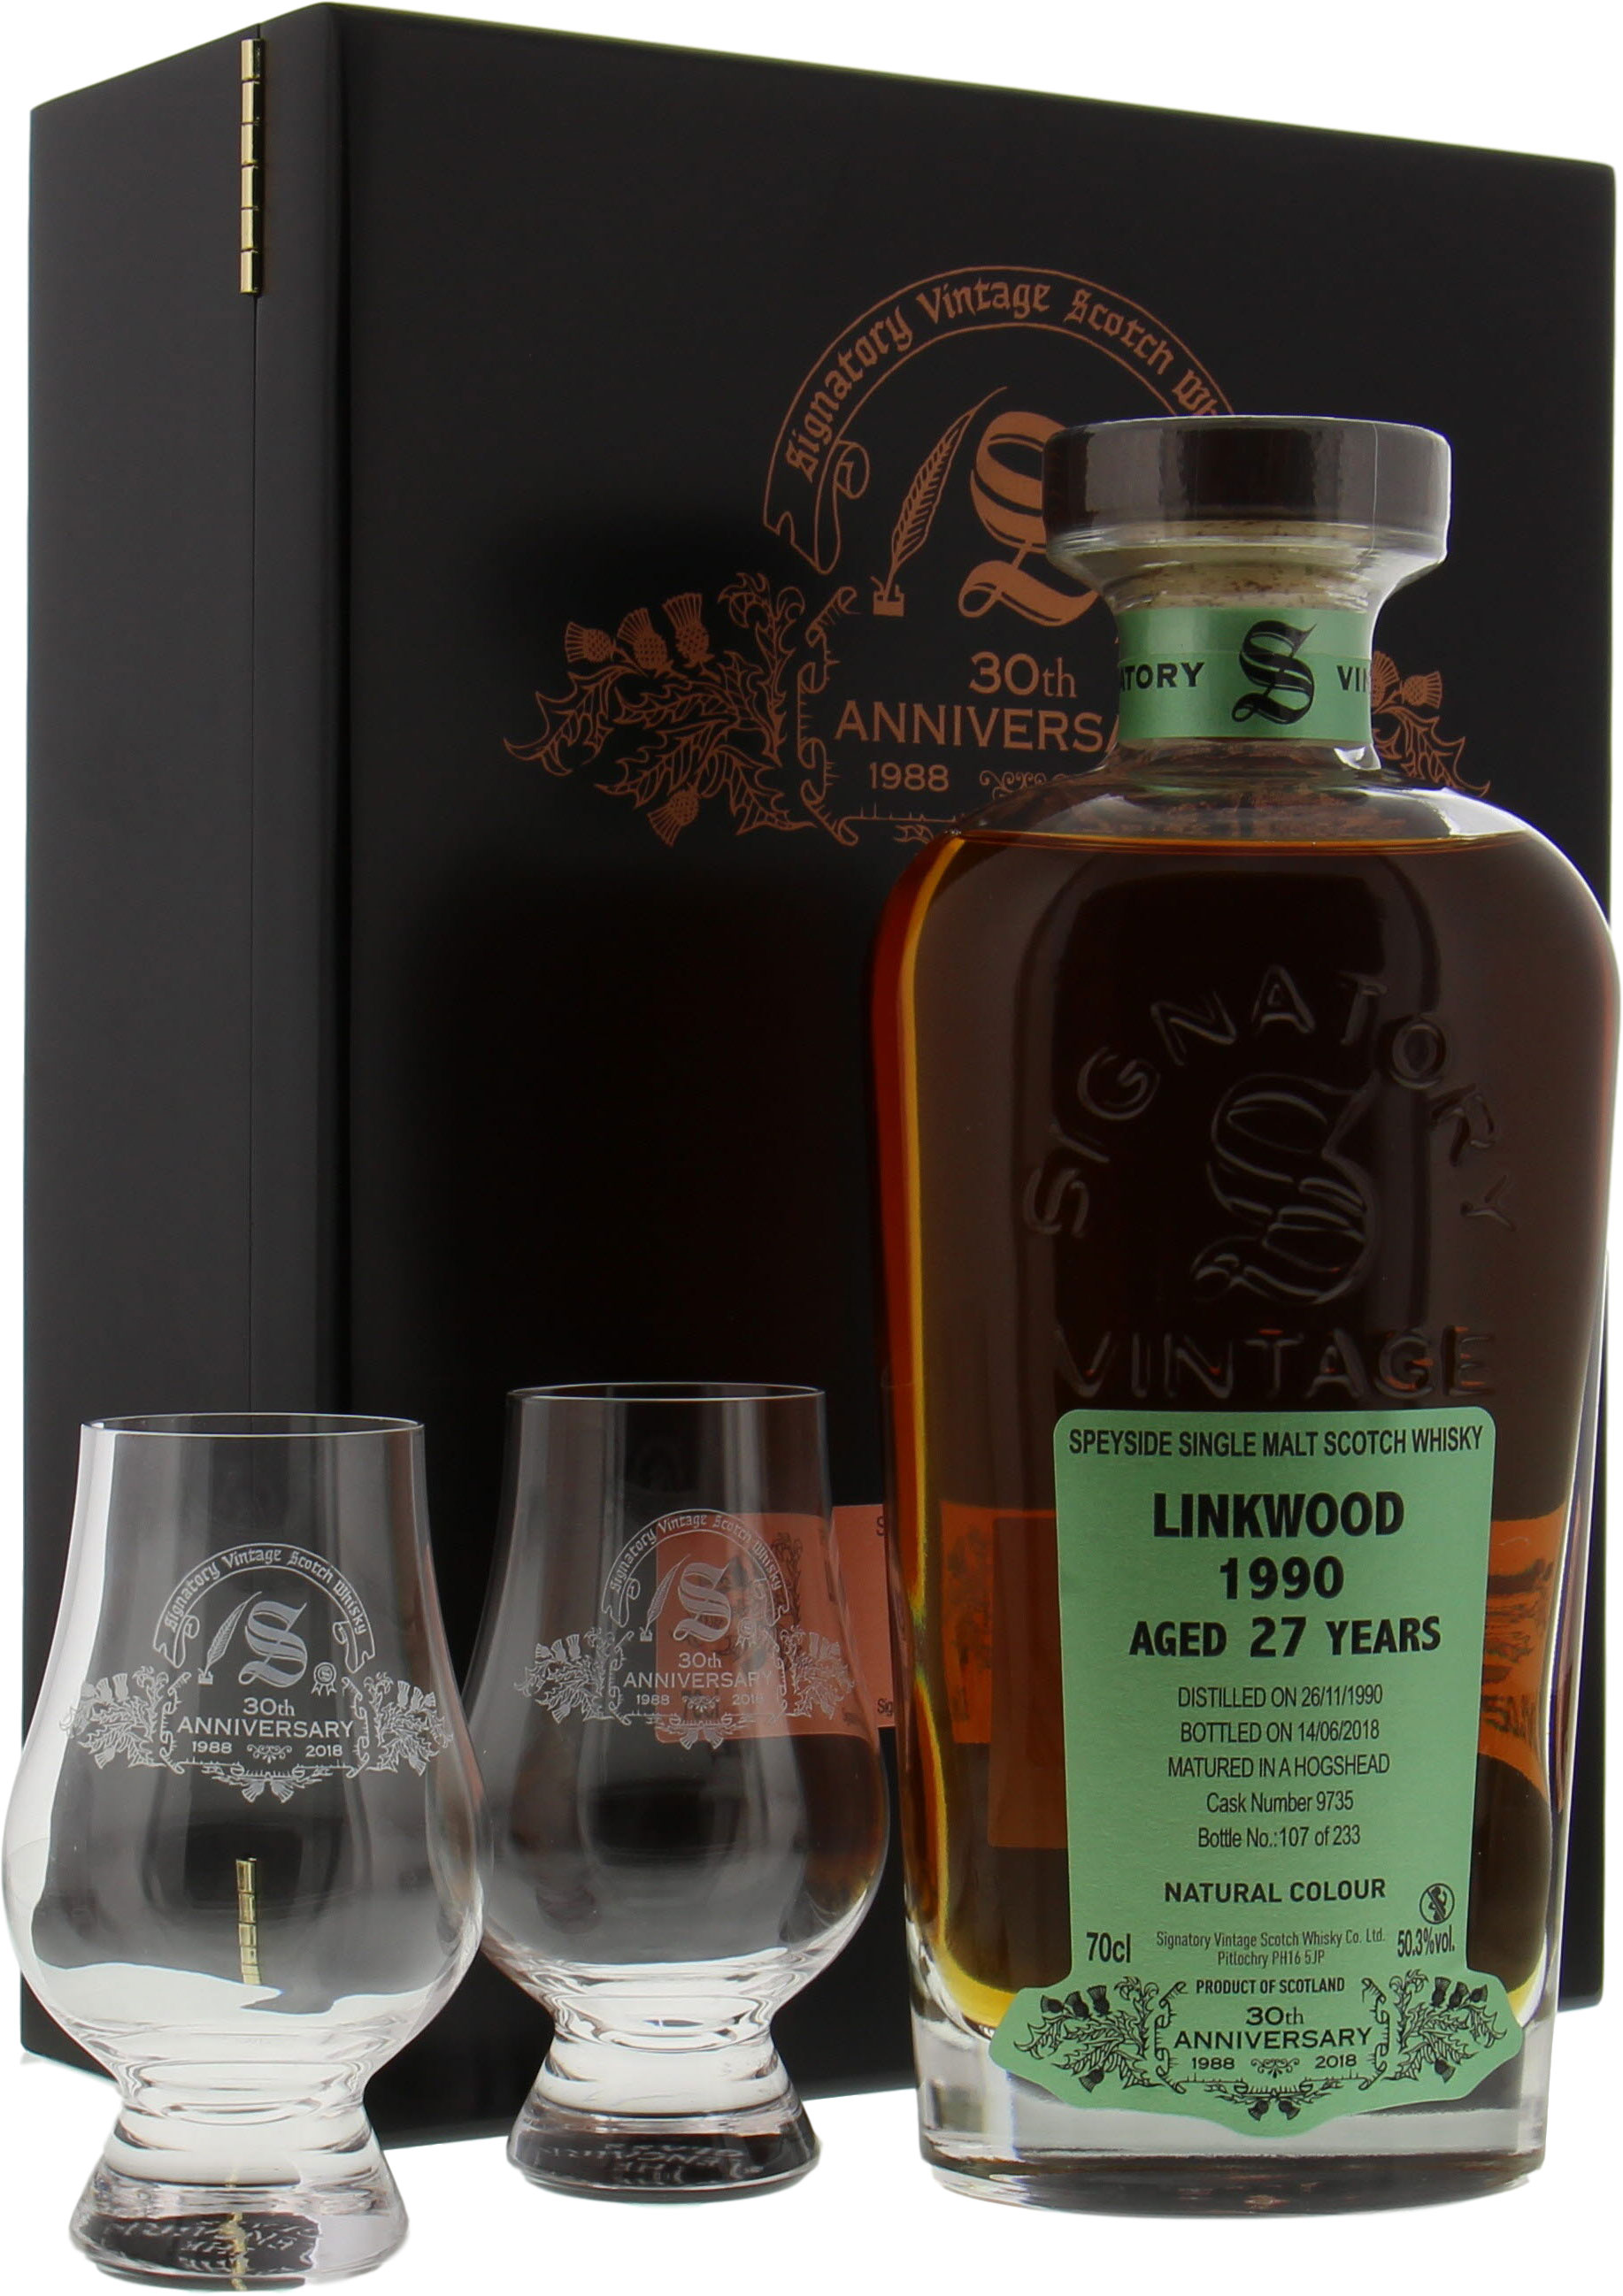 Linkwood - 27 Years Old Signatory 30th Anniversary Cask 9735 50.3% 1990 In Original Wooden Container